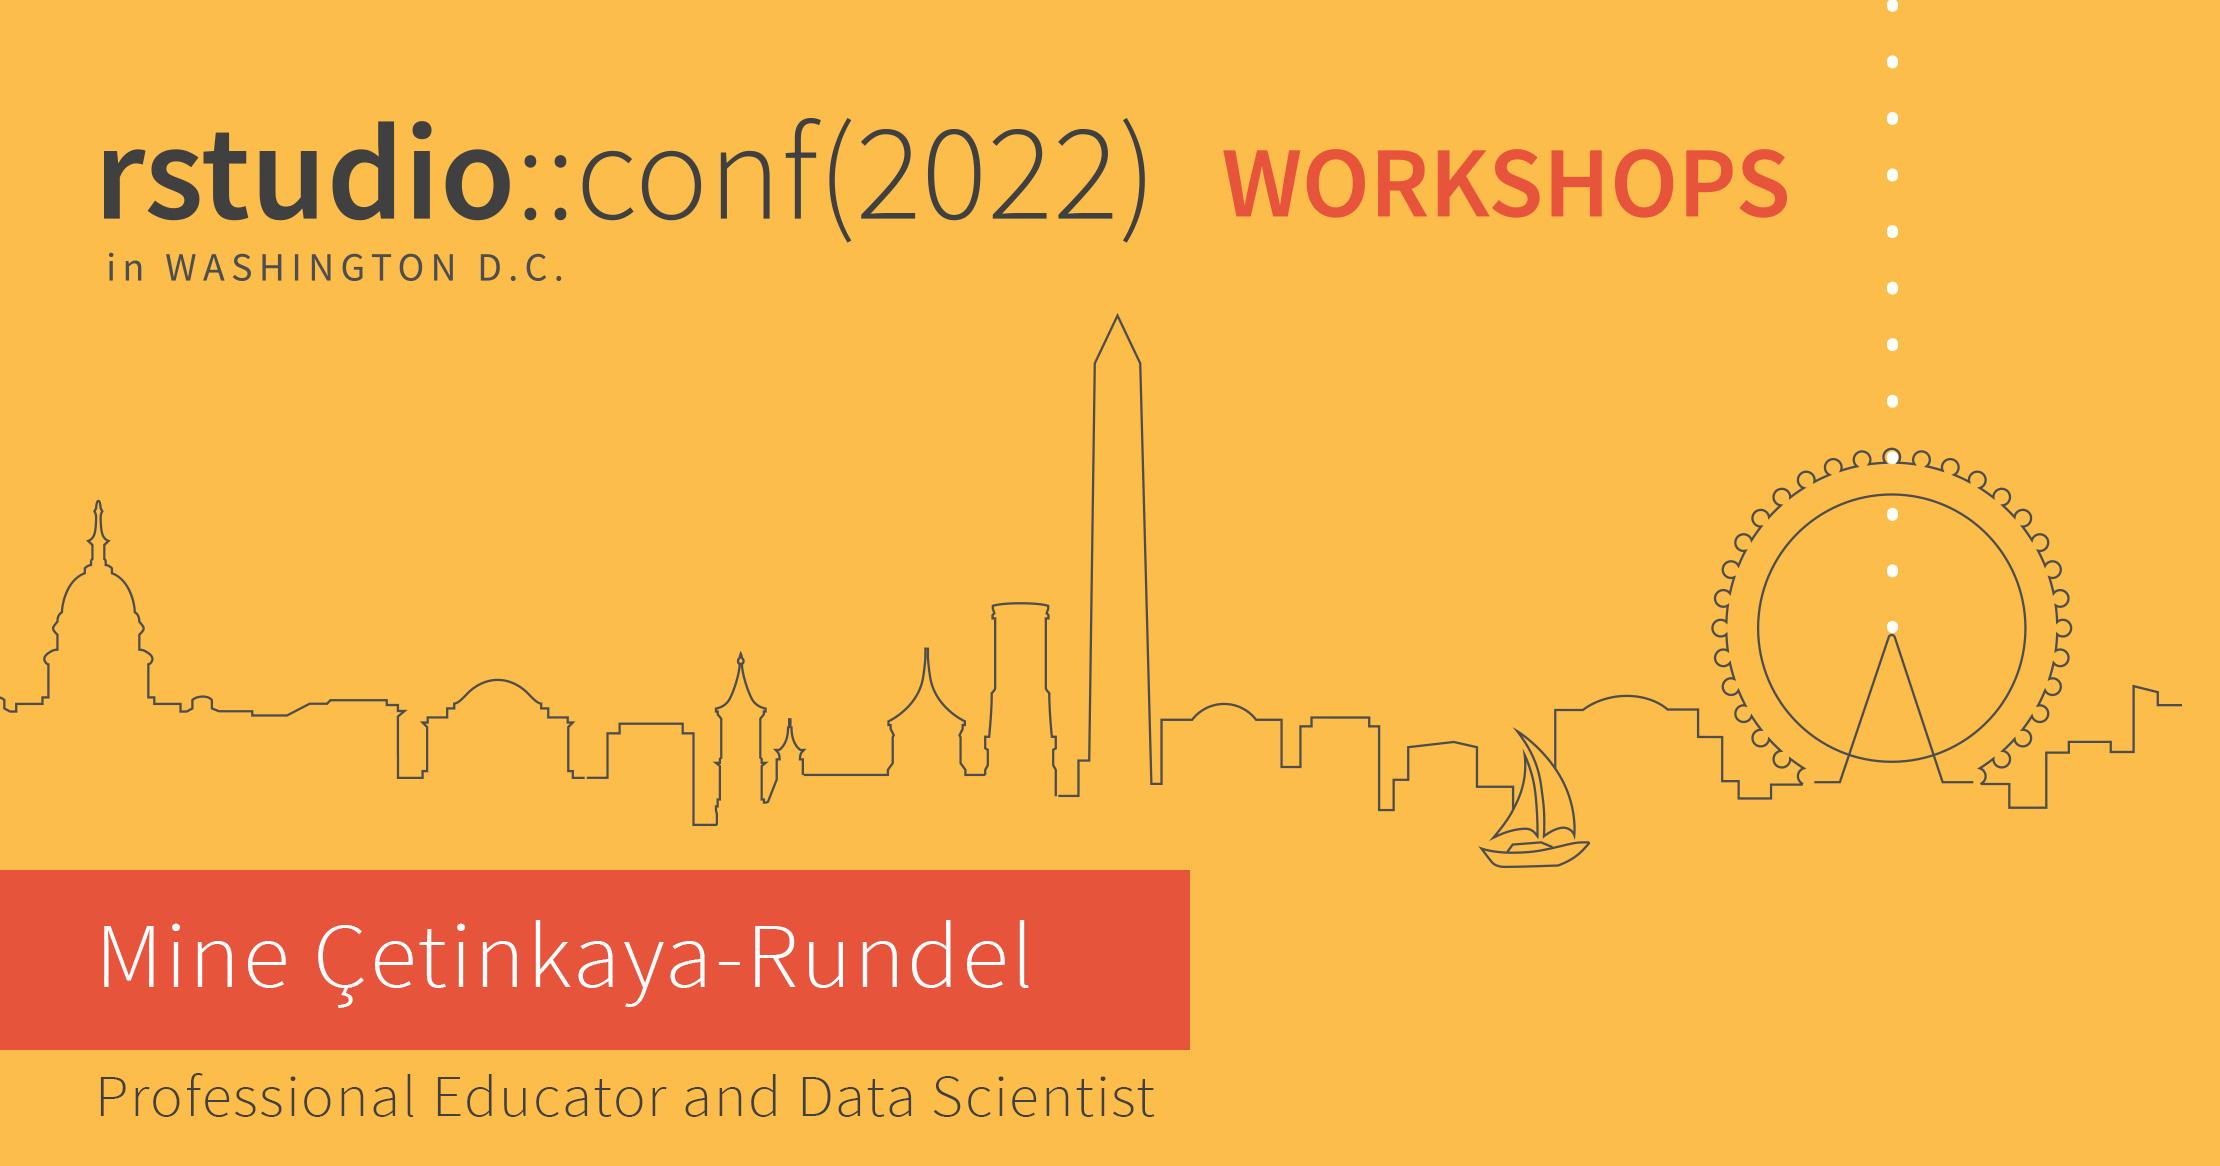 Thumbnail Yellow image with an outline of the National Harbor skyline and the words rstudio conf 2022 workshops in Washington DC, Mine Çetinkaya-Rundel Professional Educator and Data Scientist